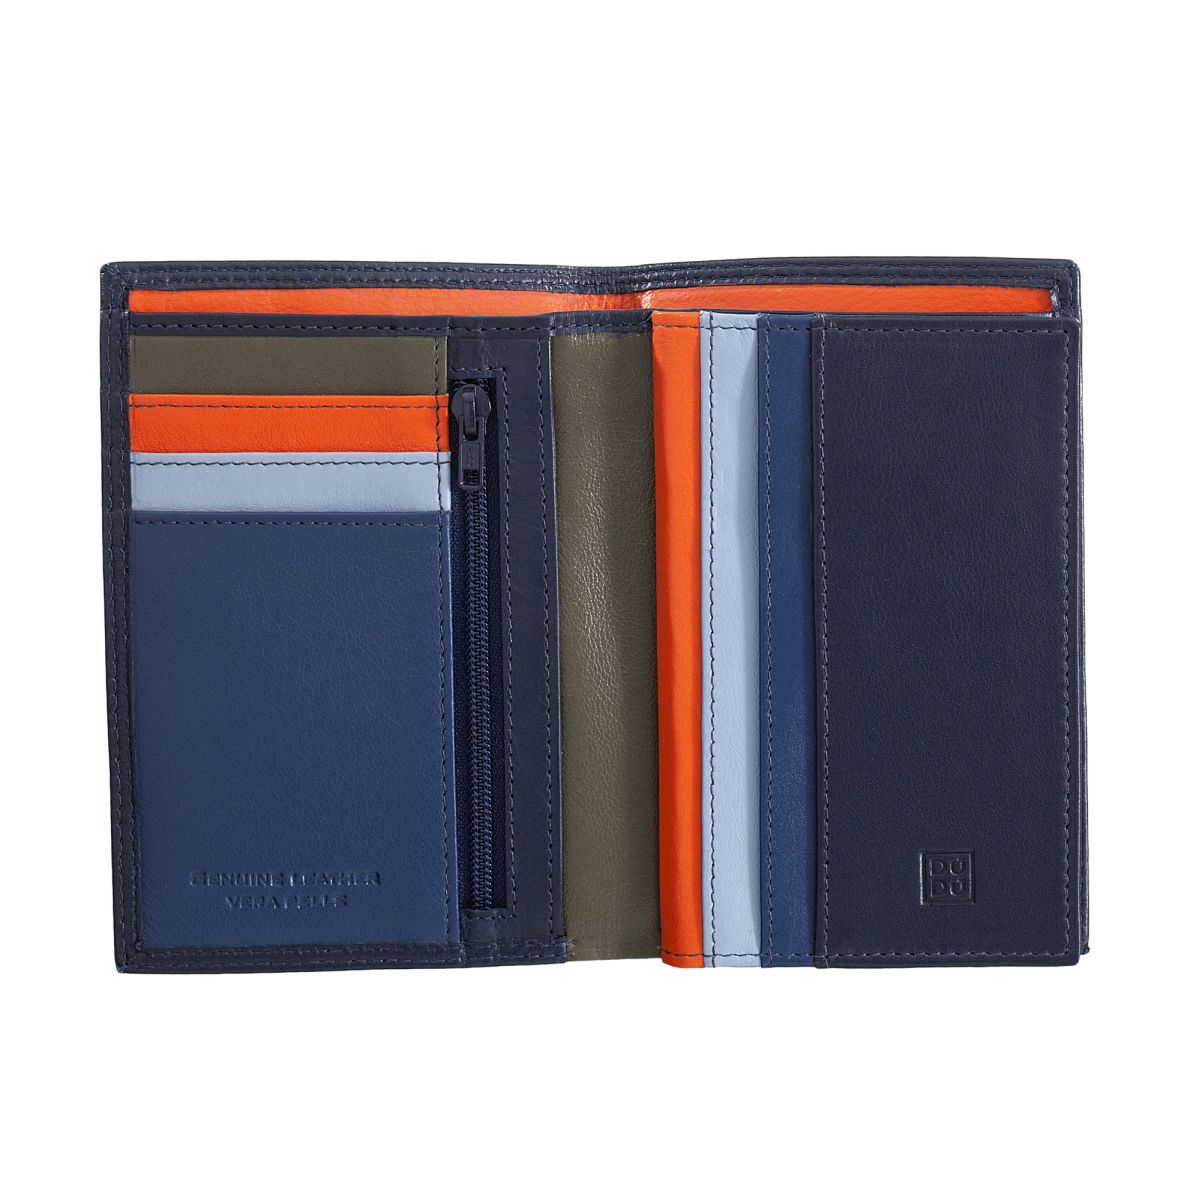 Mans leather folding wallet with inner zip - Navy